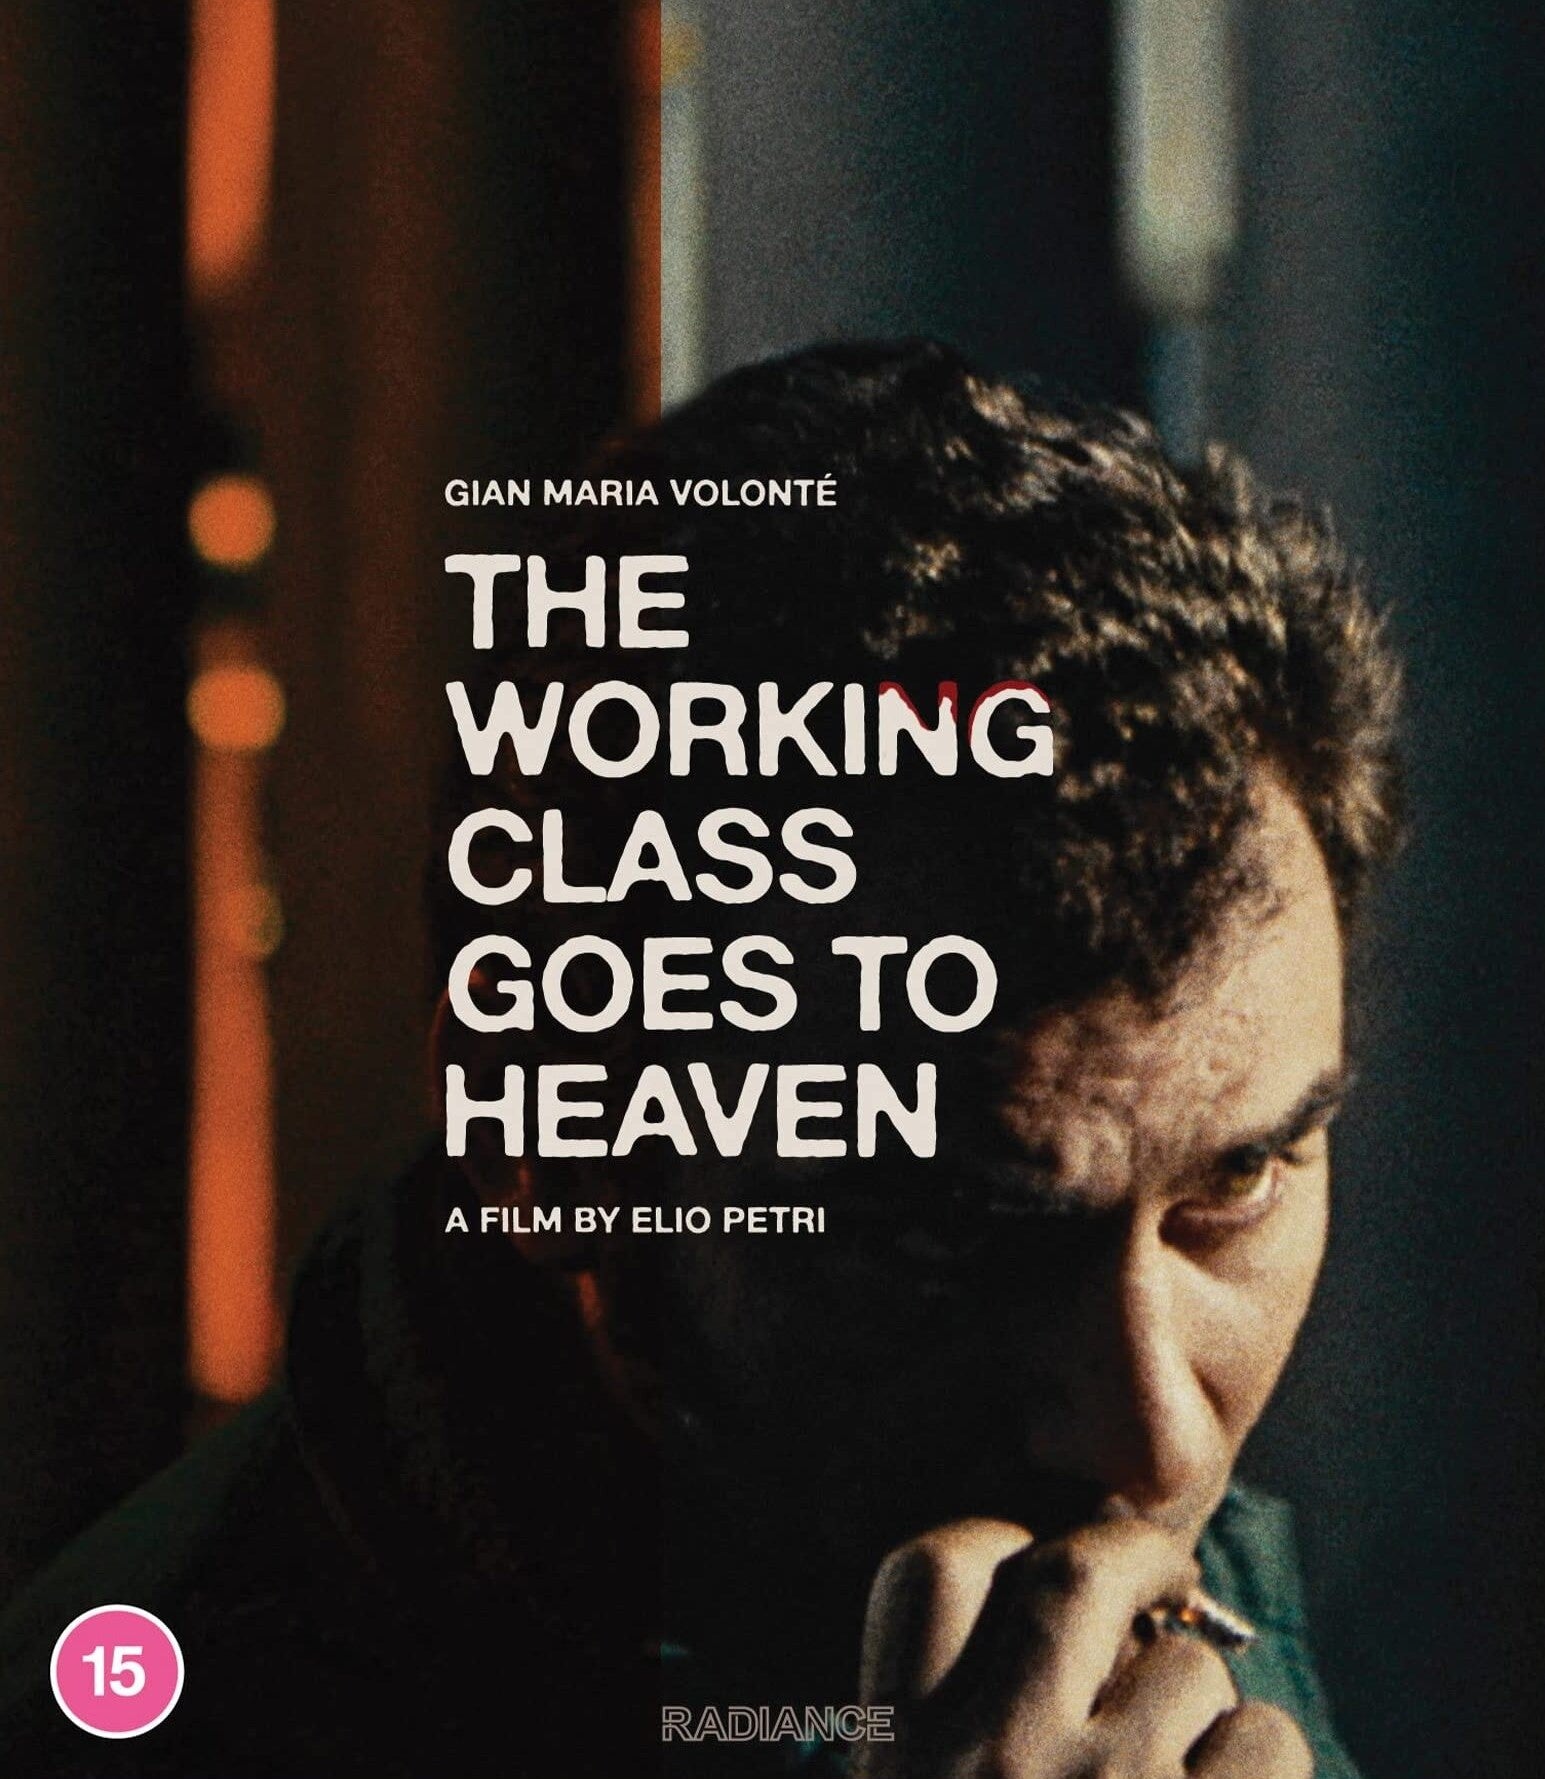 THE WORKING CLASS GOES TO HEAVEN (REGION B IMPORT) BLU-RAY